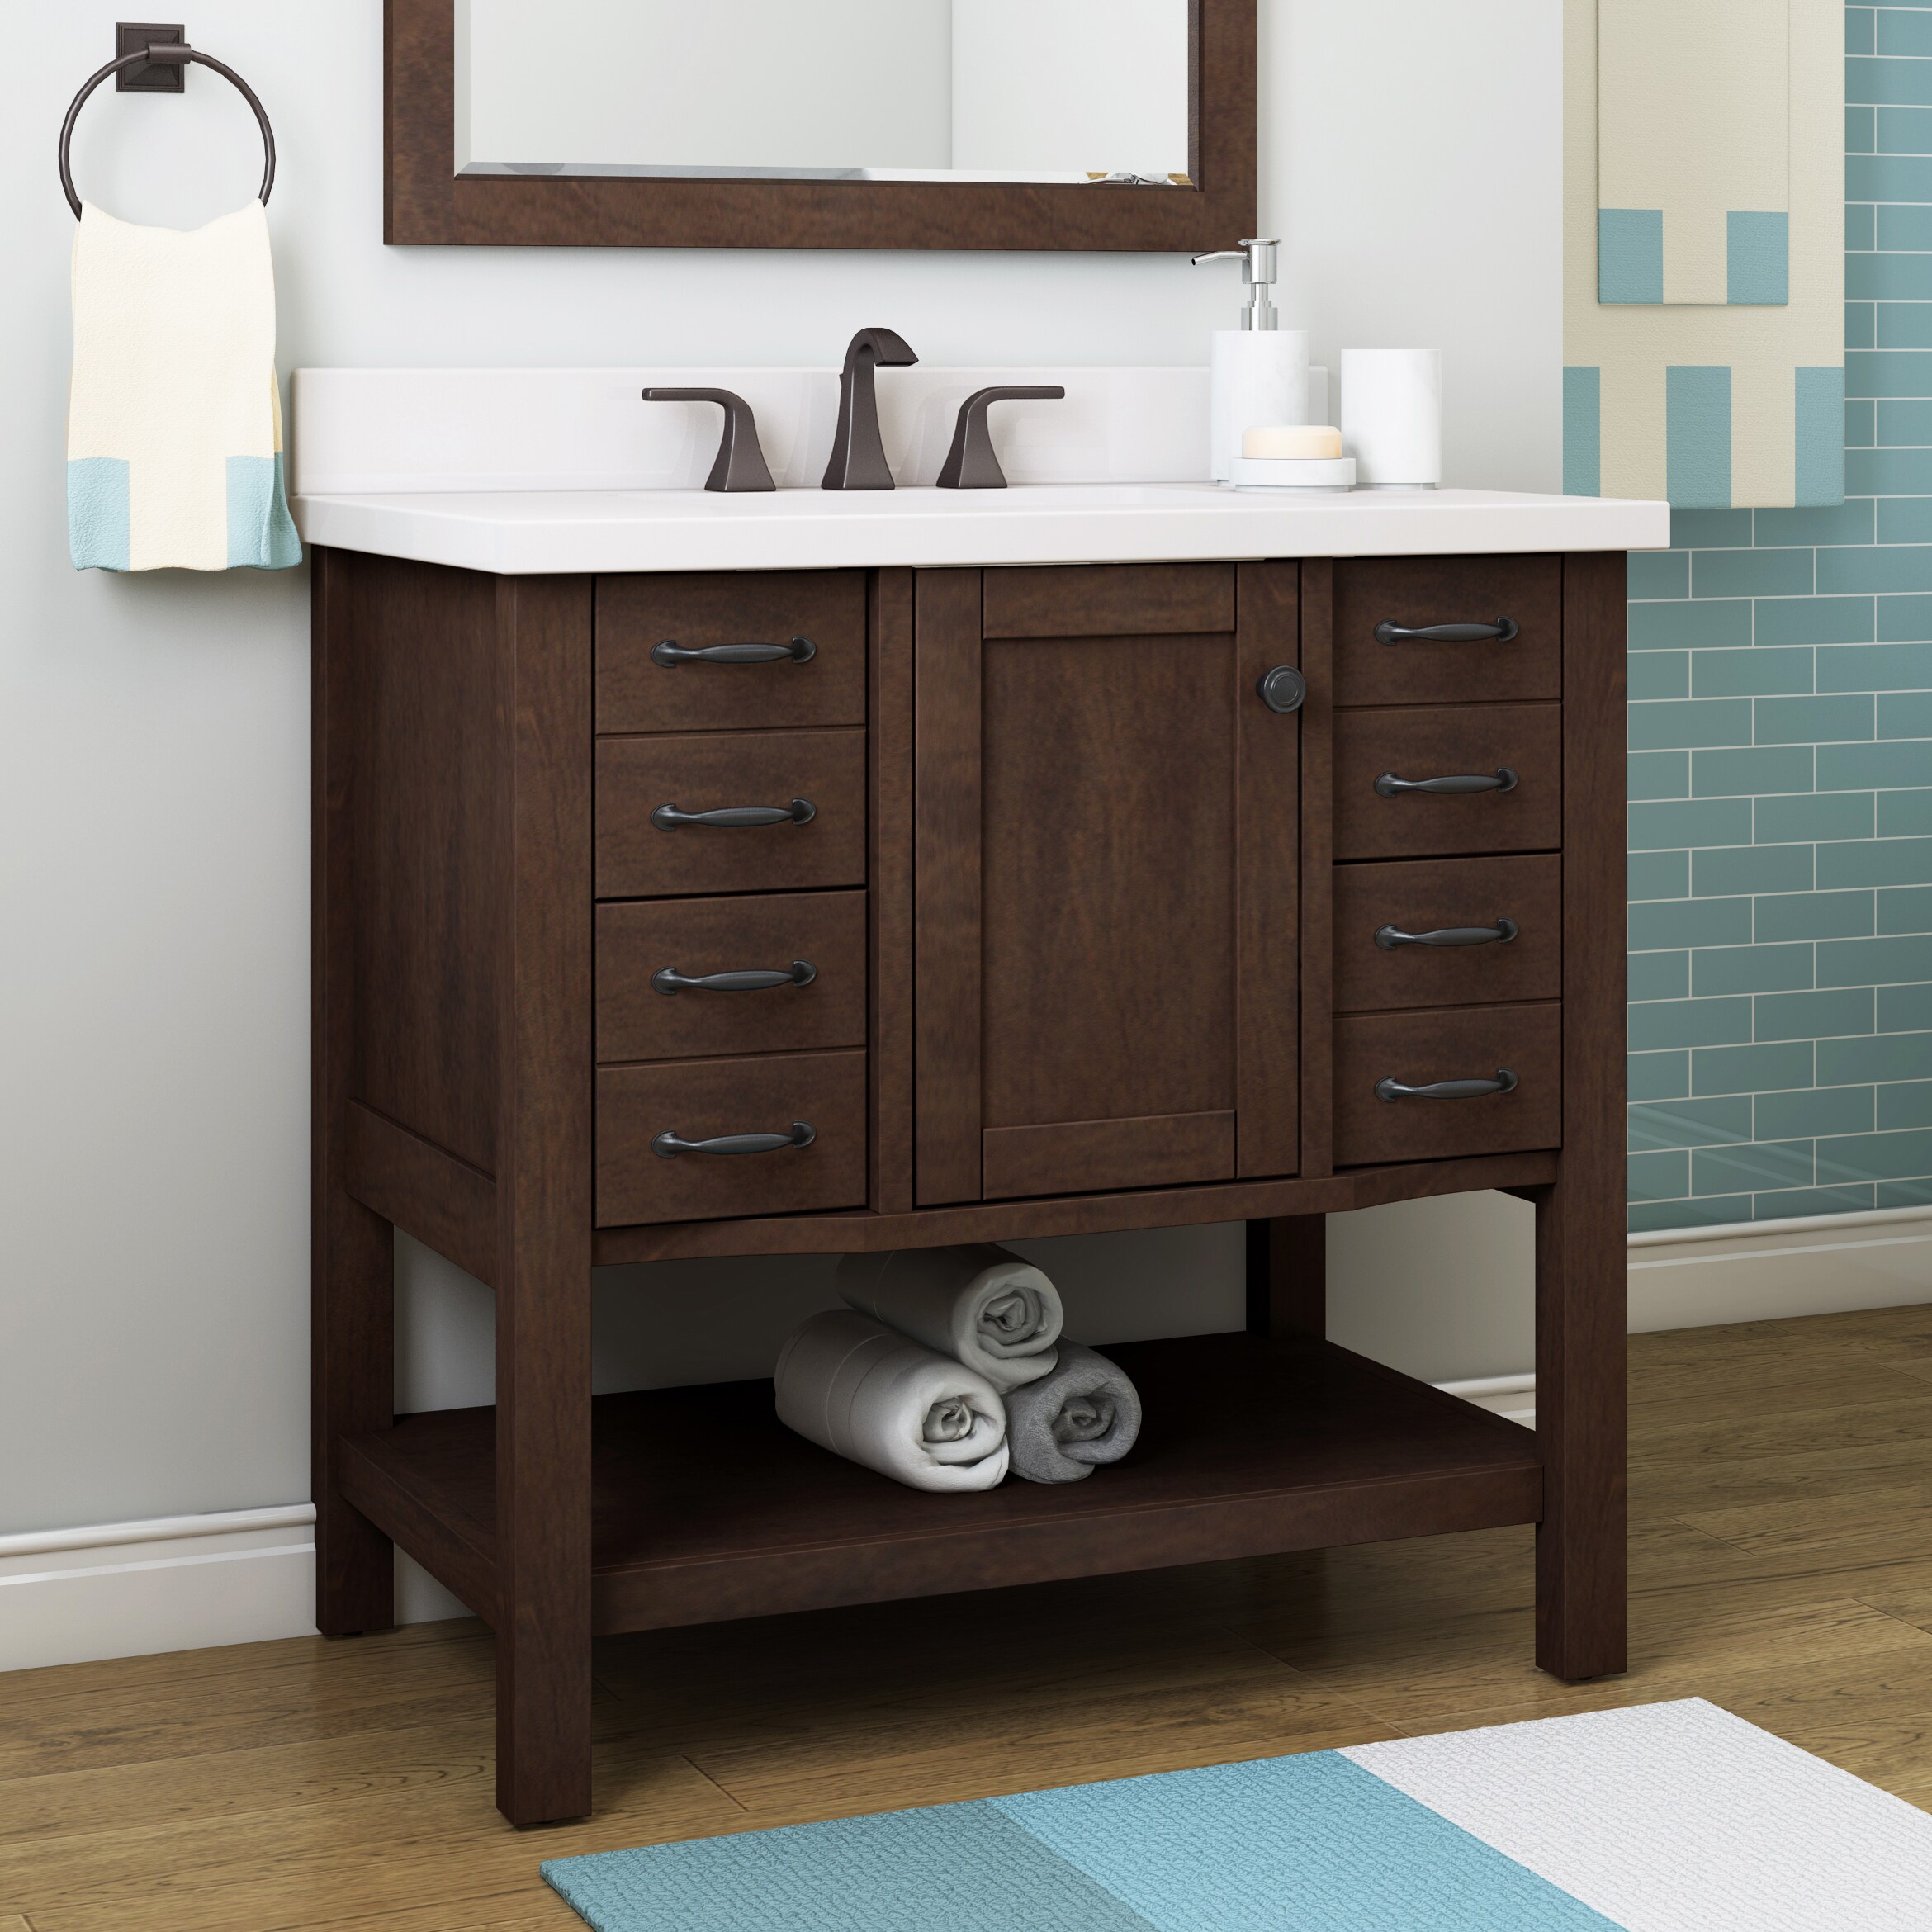 allen + roth Kingscote 36-in Undermount Top at White Engineered Vanity Espresso Single Bathroom with Stone Sink